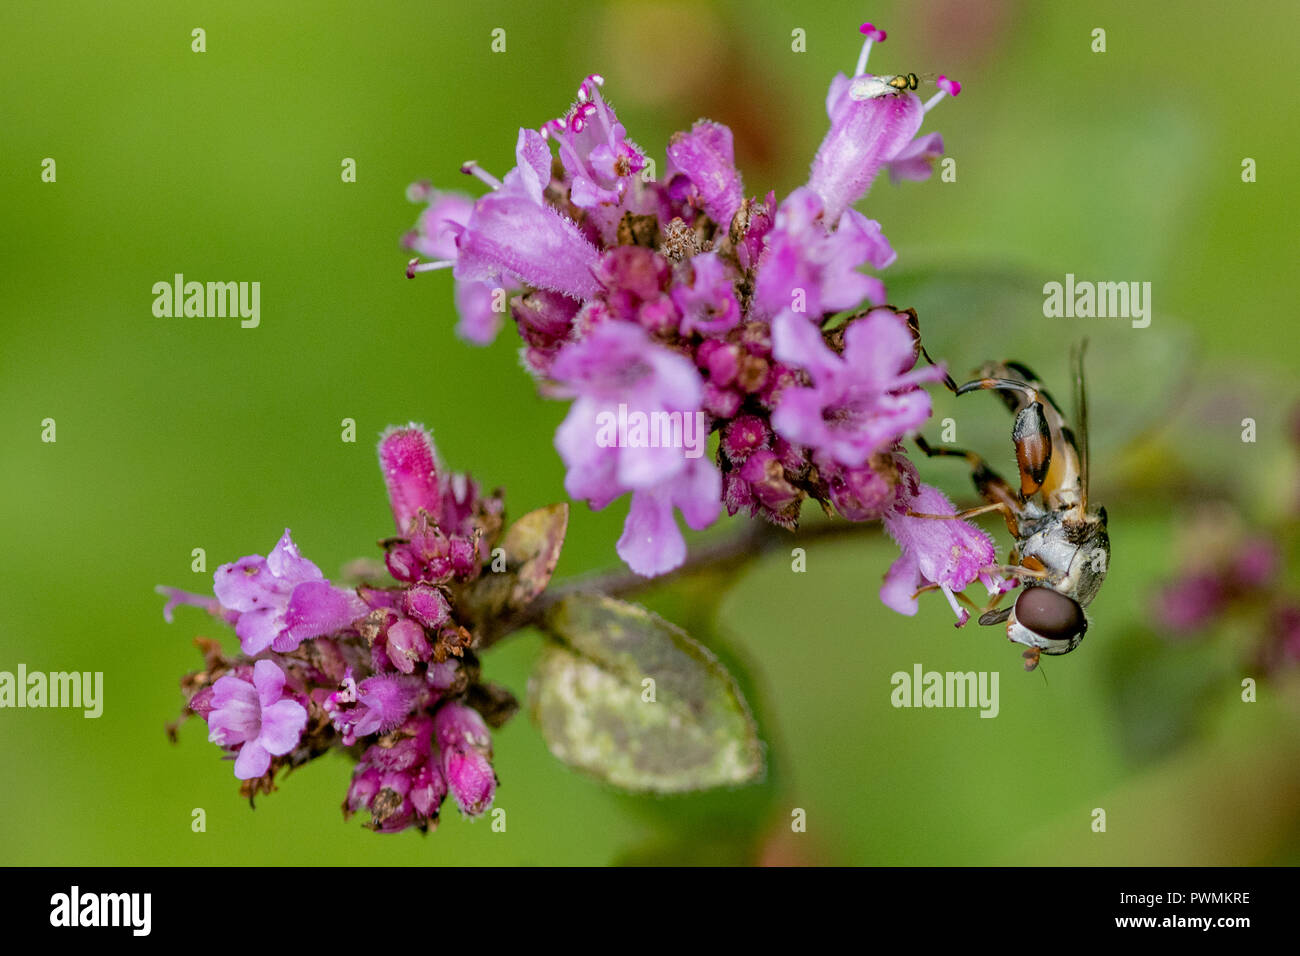 Close up of a Hoverfly collecting nectar from a purple flower, similar to a Neputa Nuda with a blurred garden background. Stock Photo